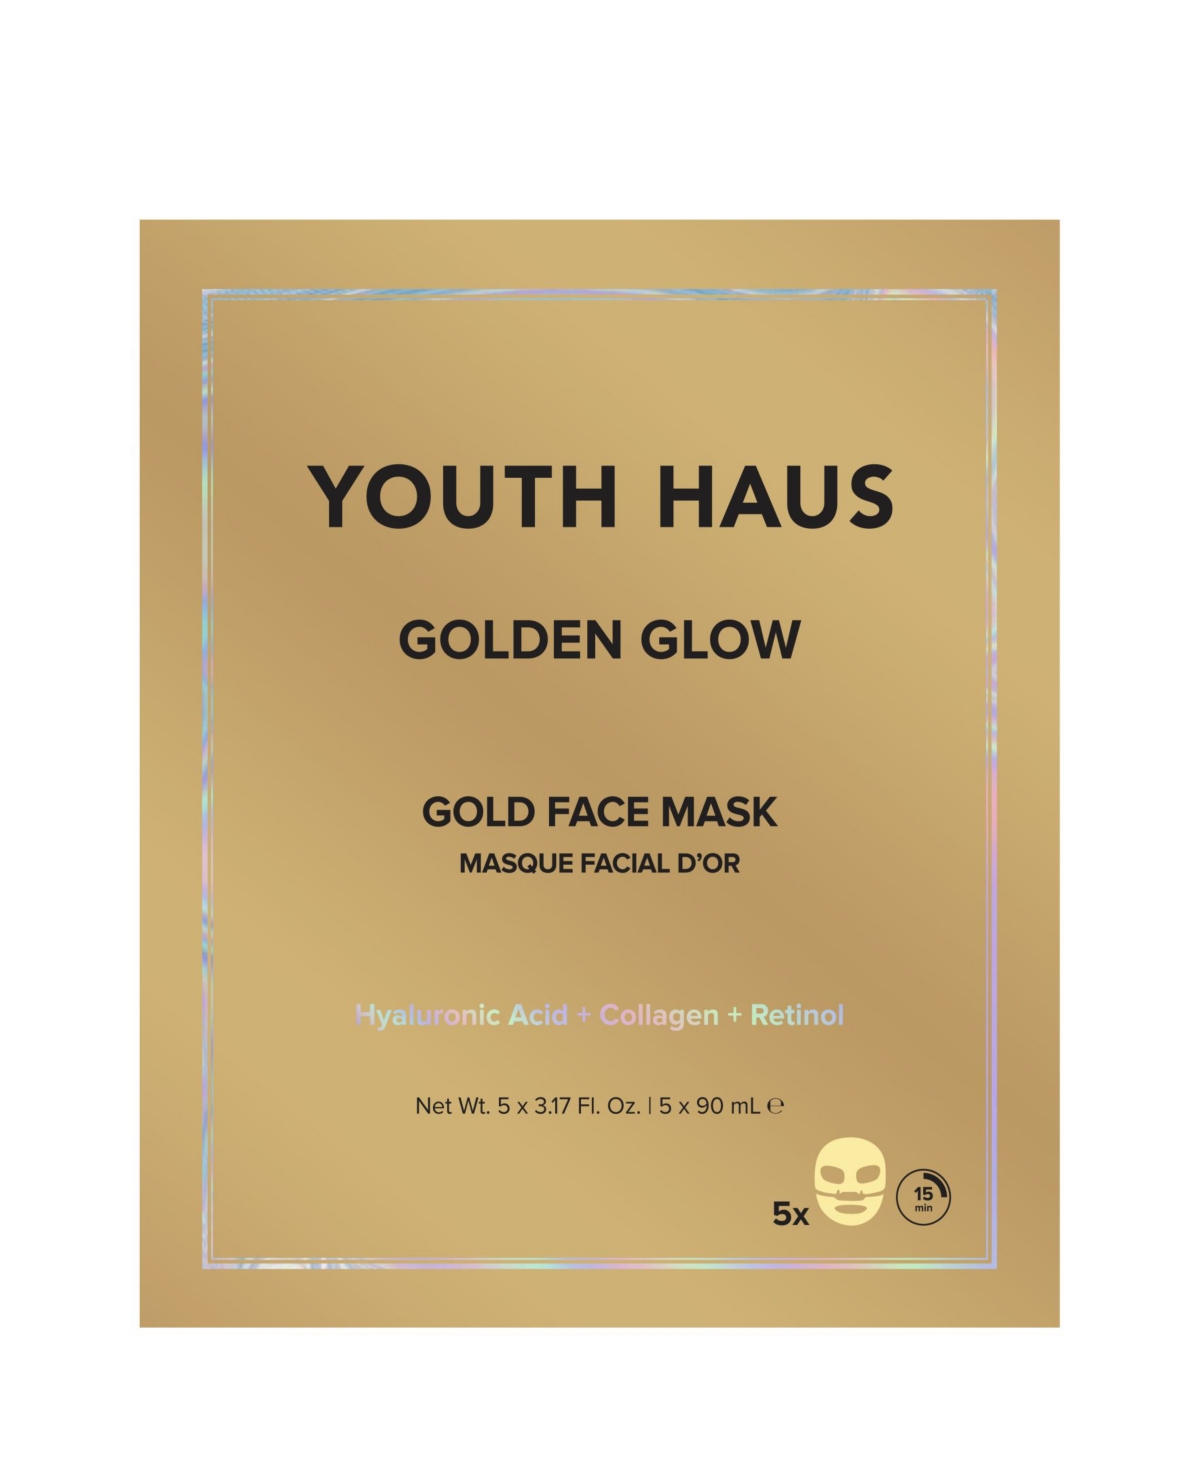 Youth Haus Golden Glow Gold Face Mask, 5-Pk.